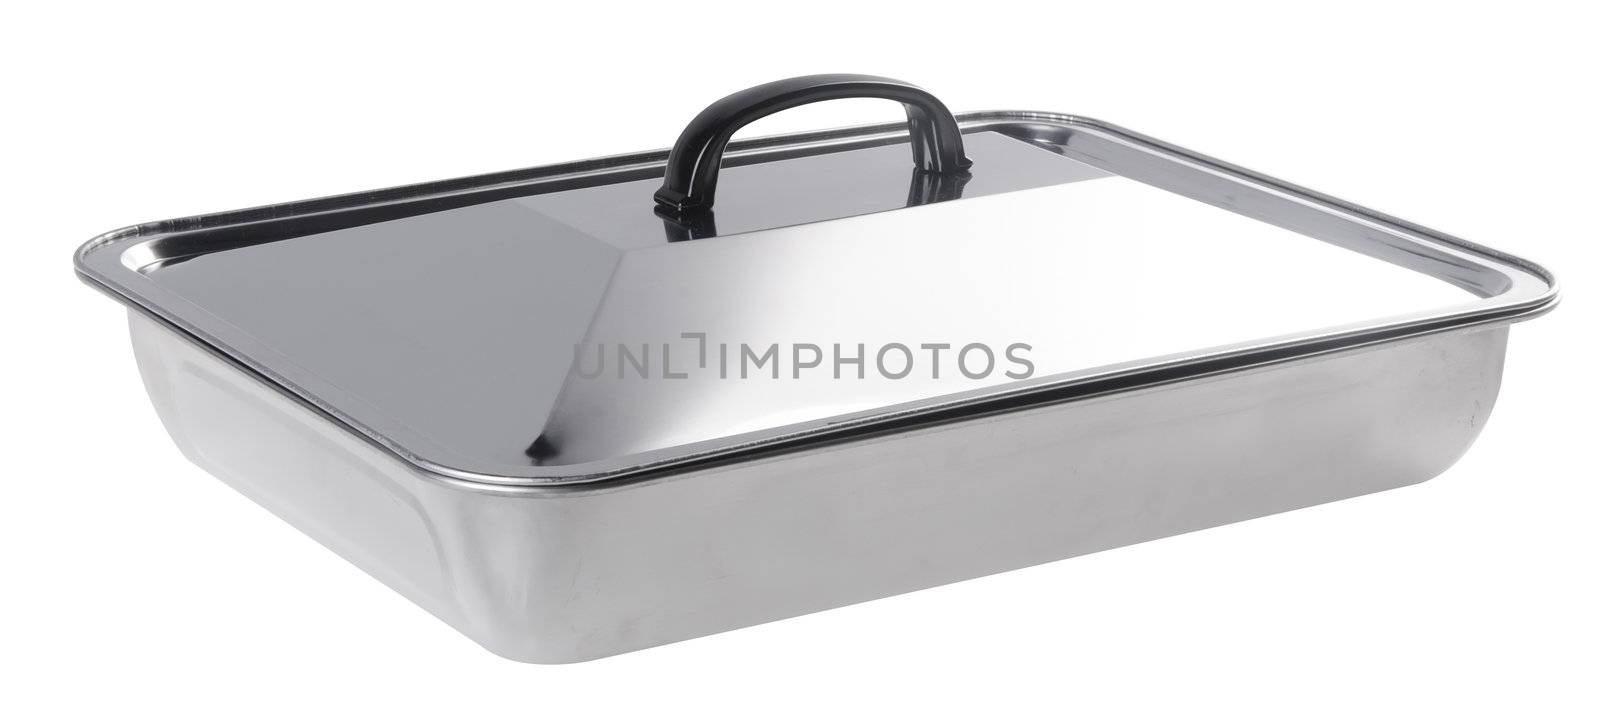 food containers, stainless steel food containers on white background by heinteh